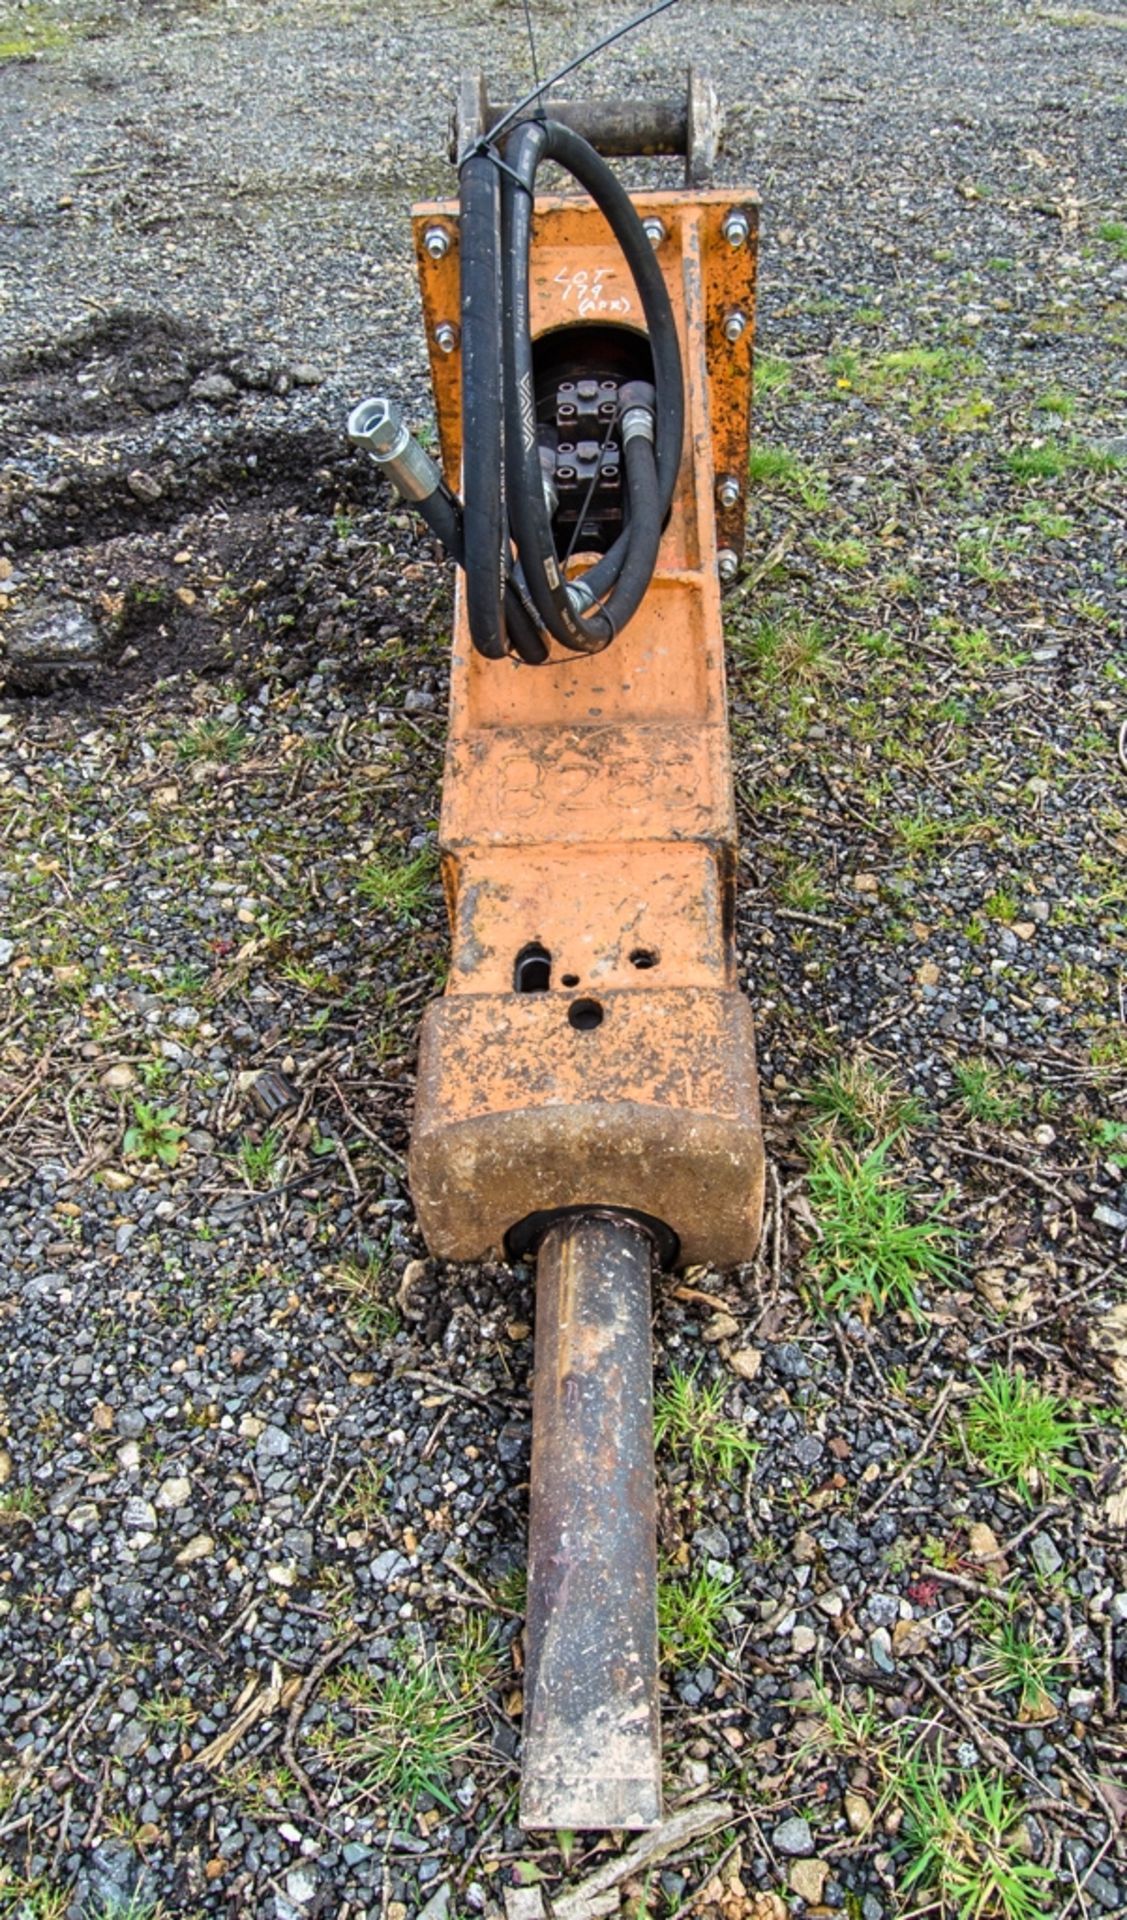 Indeco hydraulic breaker to suit excavator Pin diameter: 65mm Pin centres: 400mm Pin width: 270mm - Image 4 of 4